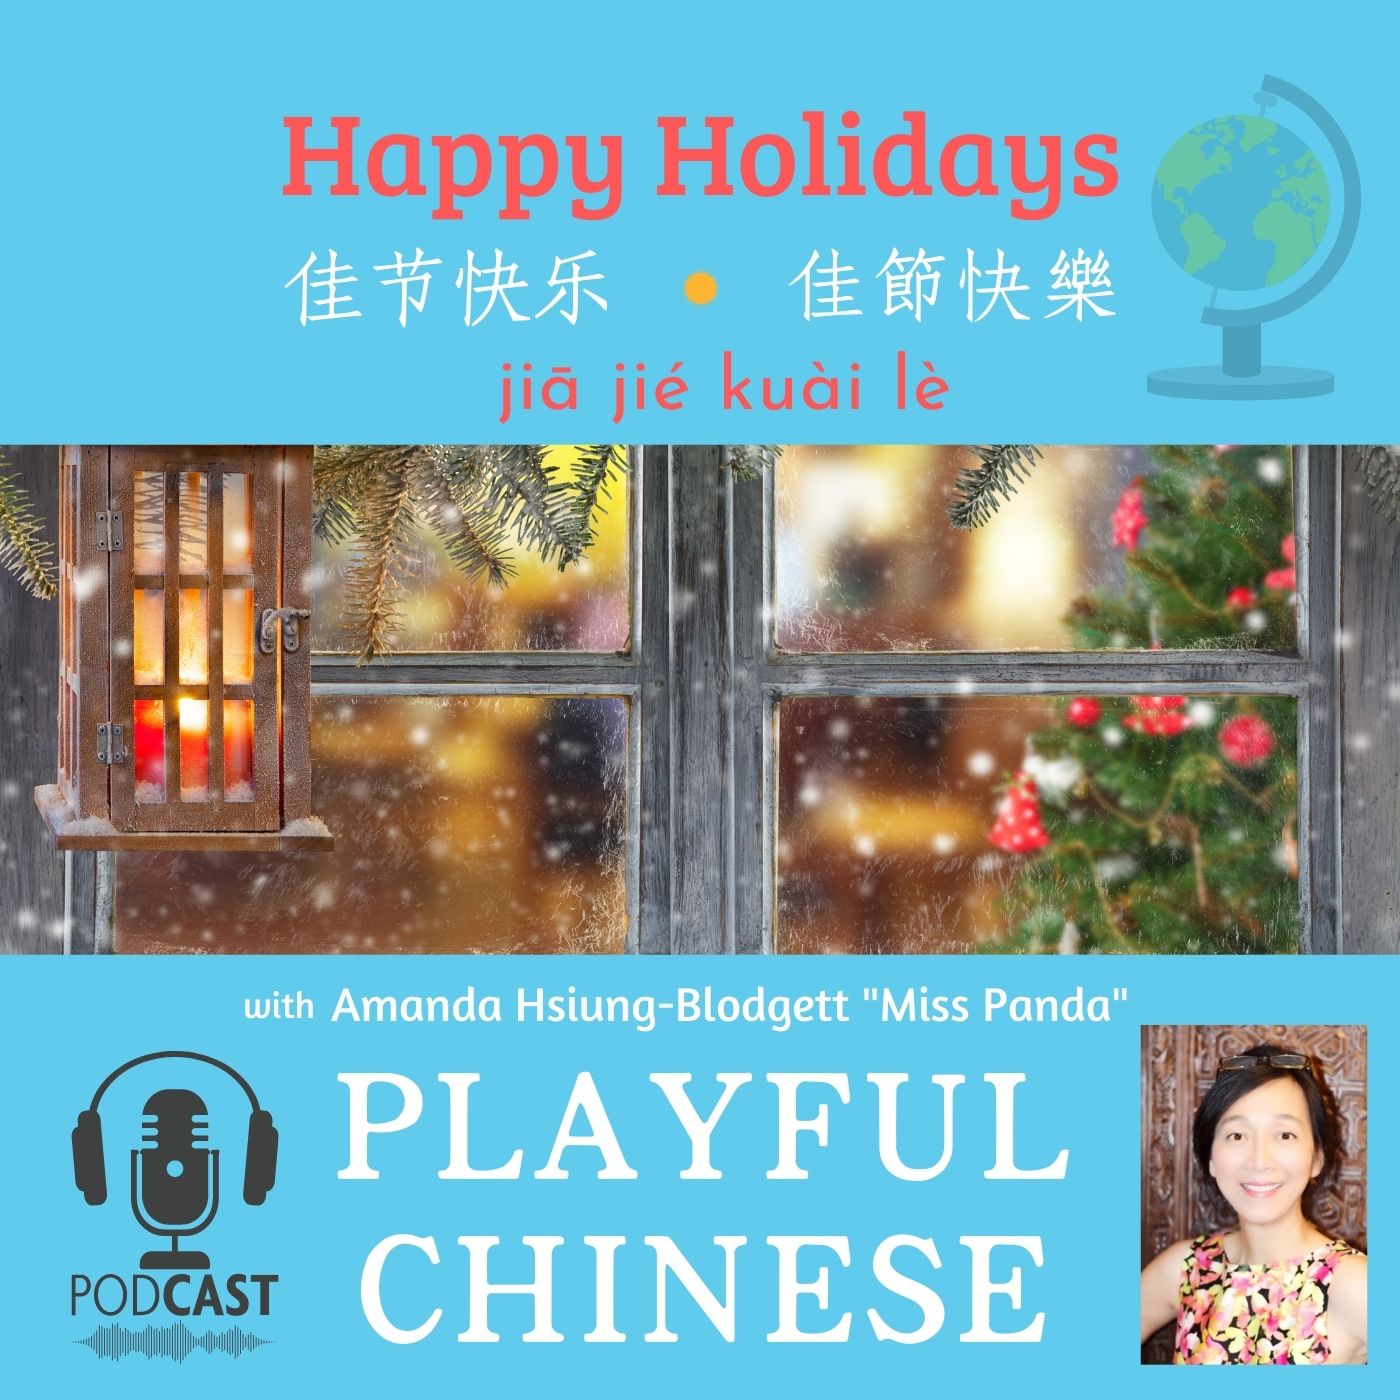 PLAYFUL CHINESE PODCAST | Happy Holidays